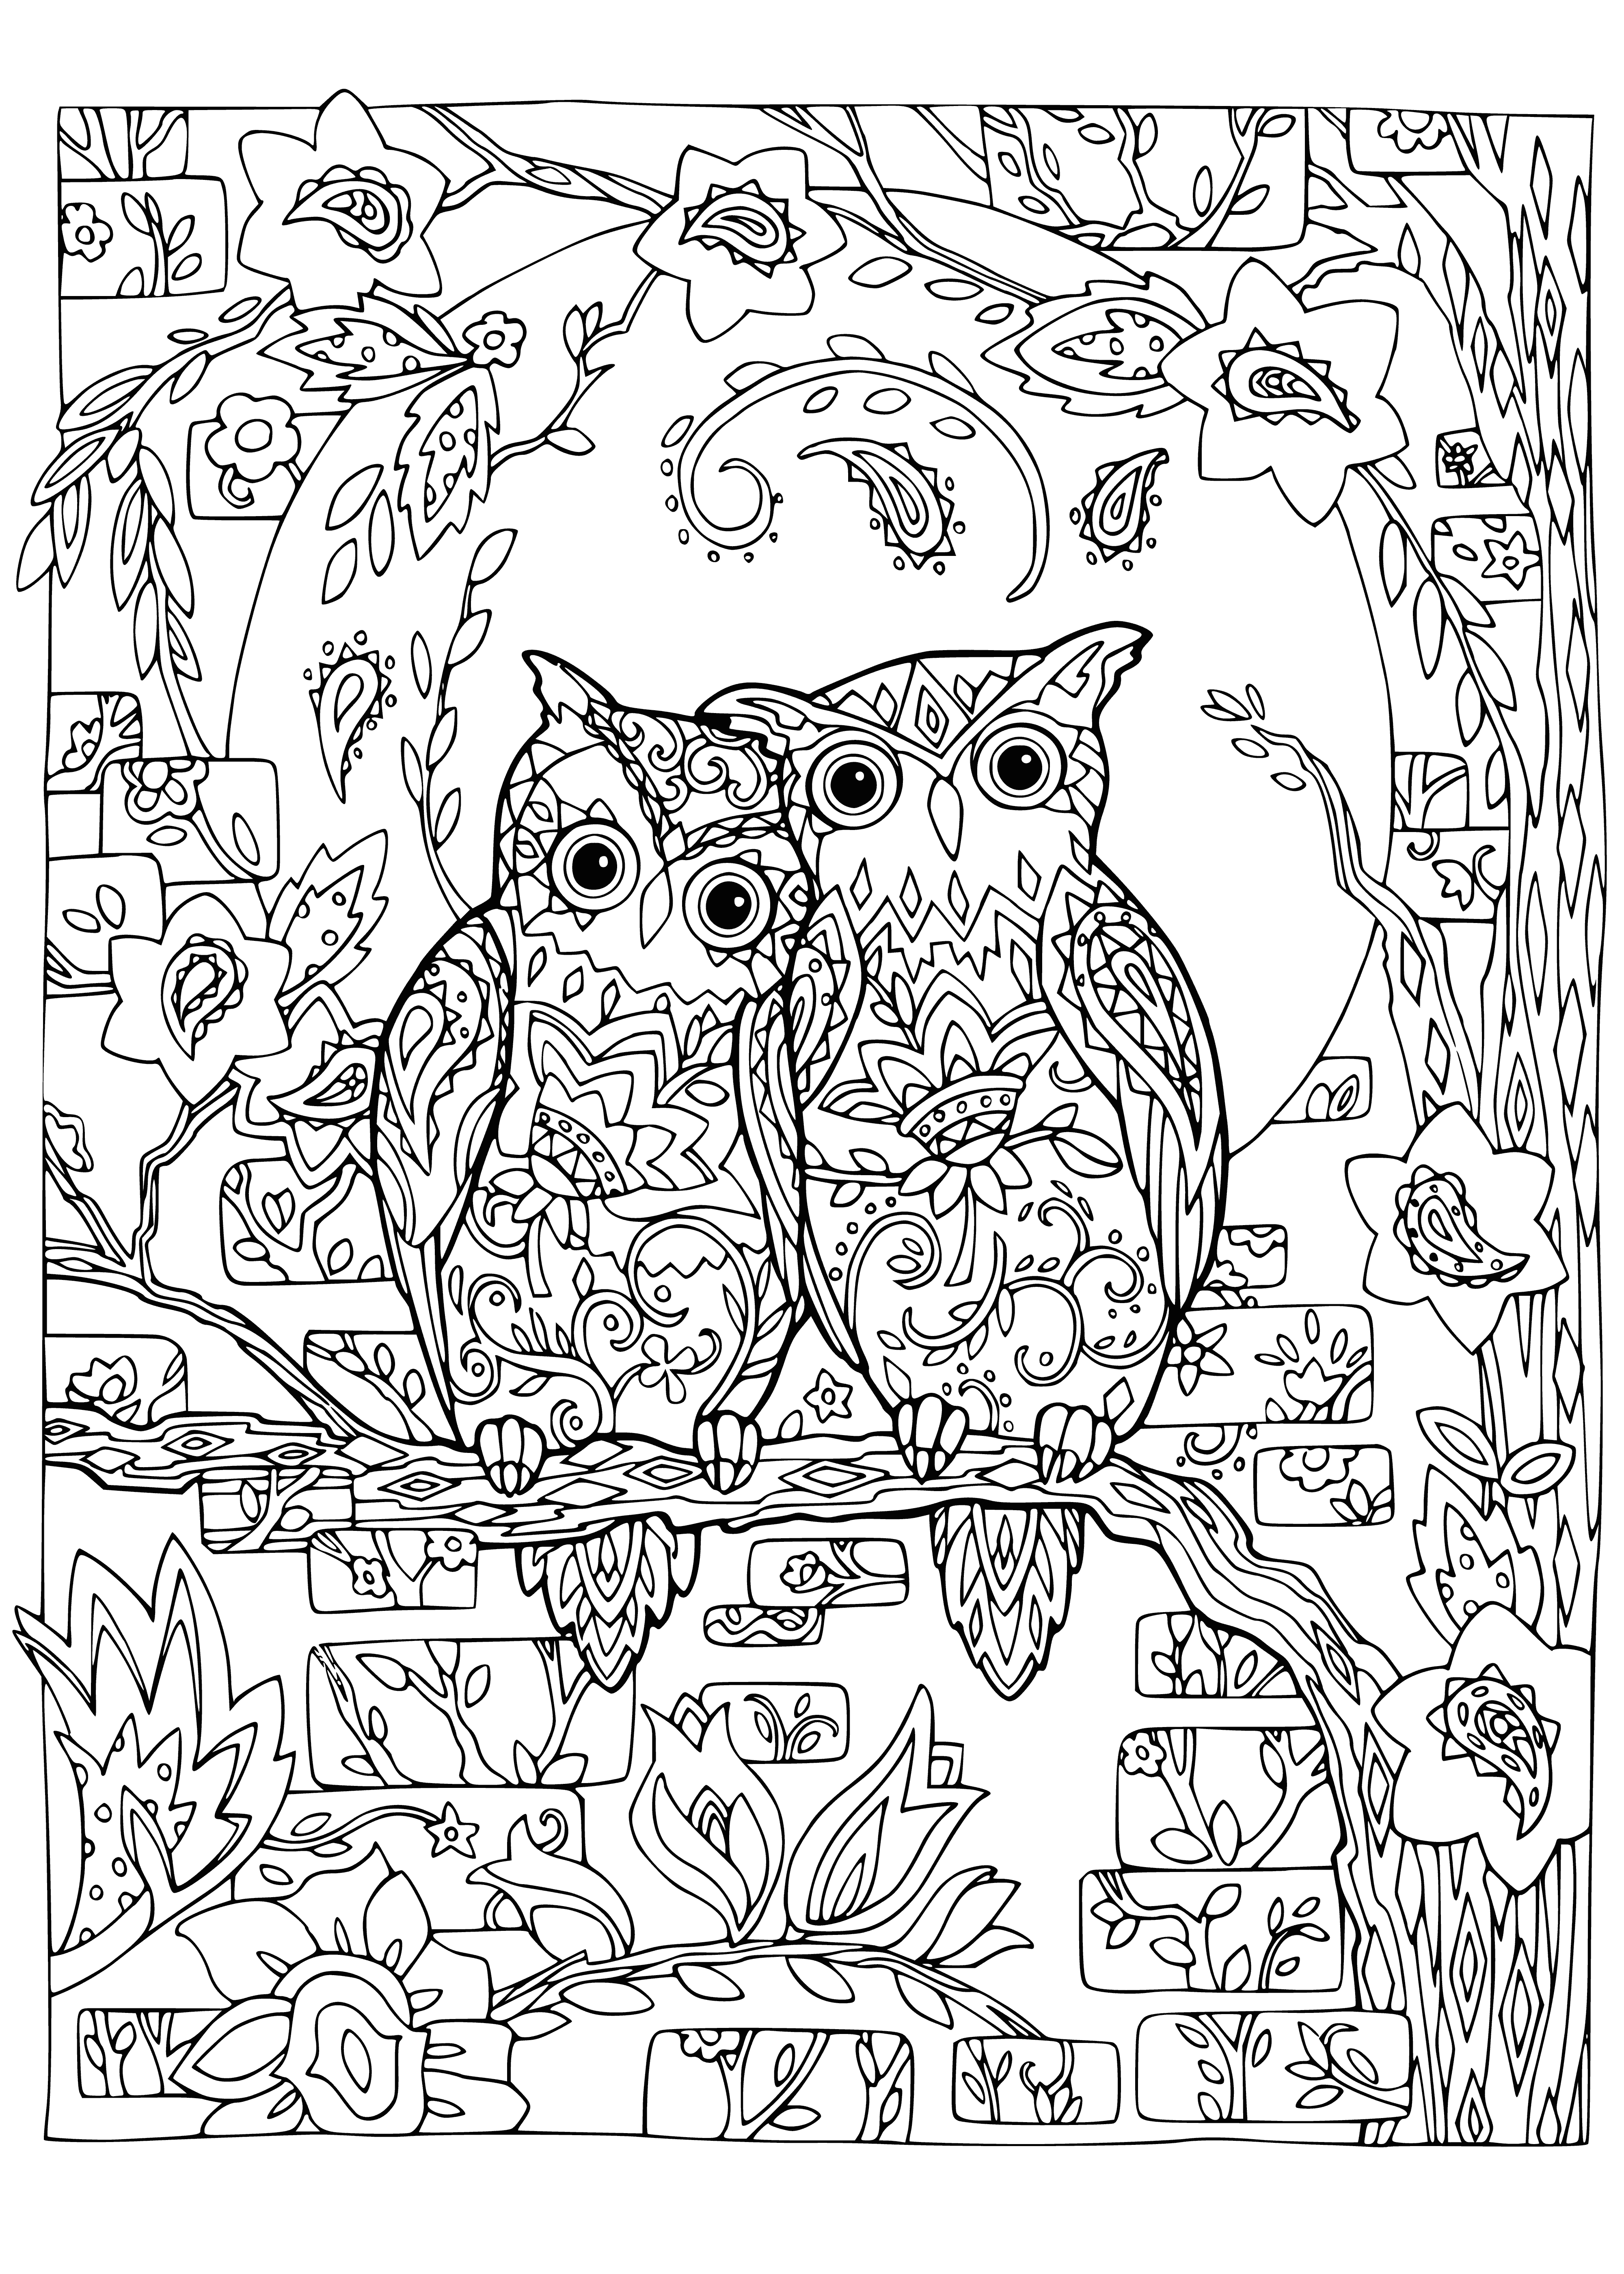 coloring page: .
Beautiful owls featured on fabric with a dreamy heart-filled sky.

Fabric featuring owls and hearts in shades of blue and purple. Perfect for dreamers!